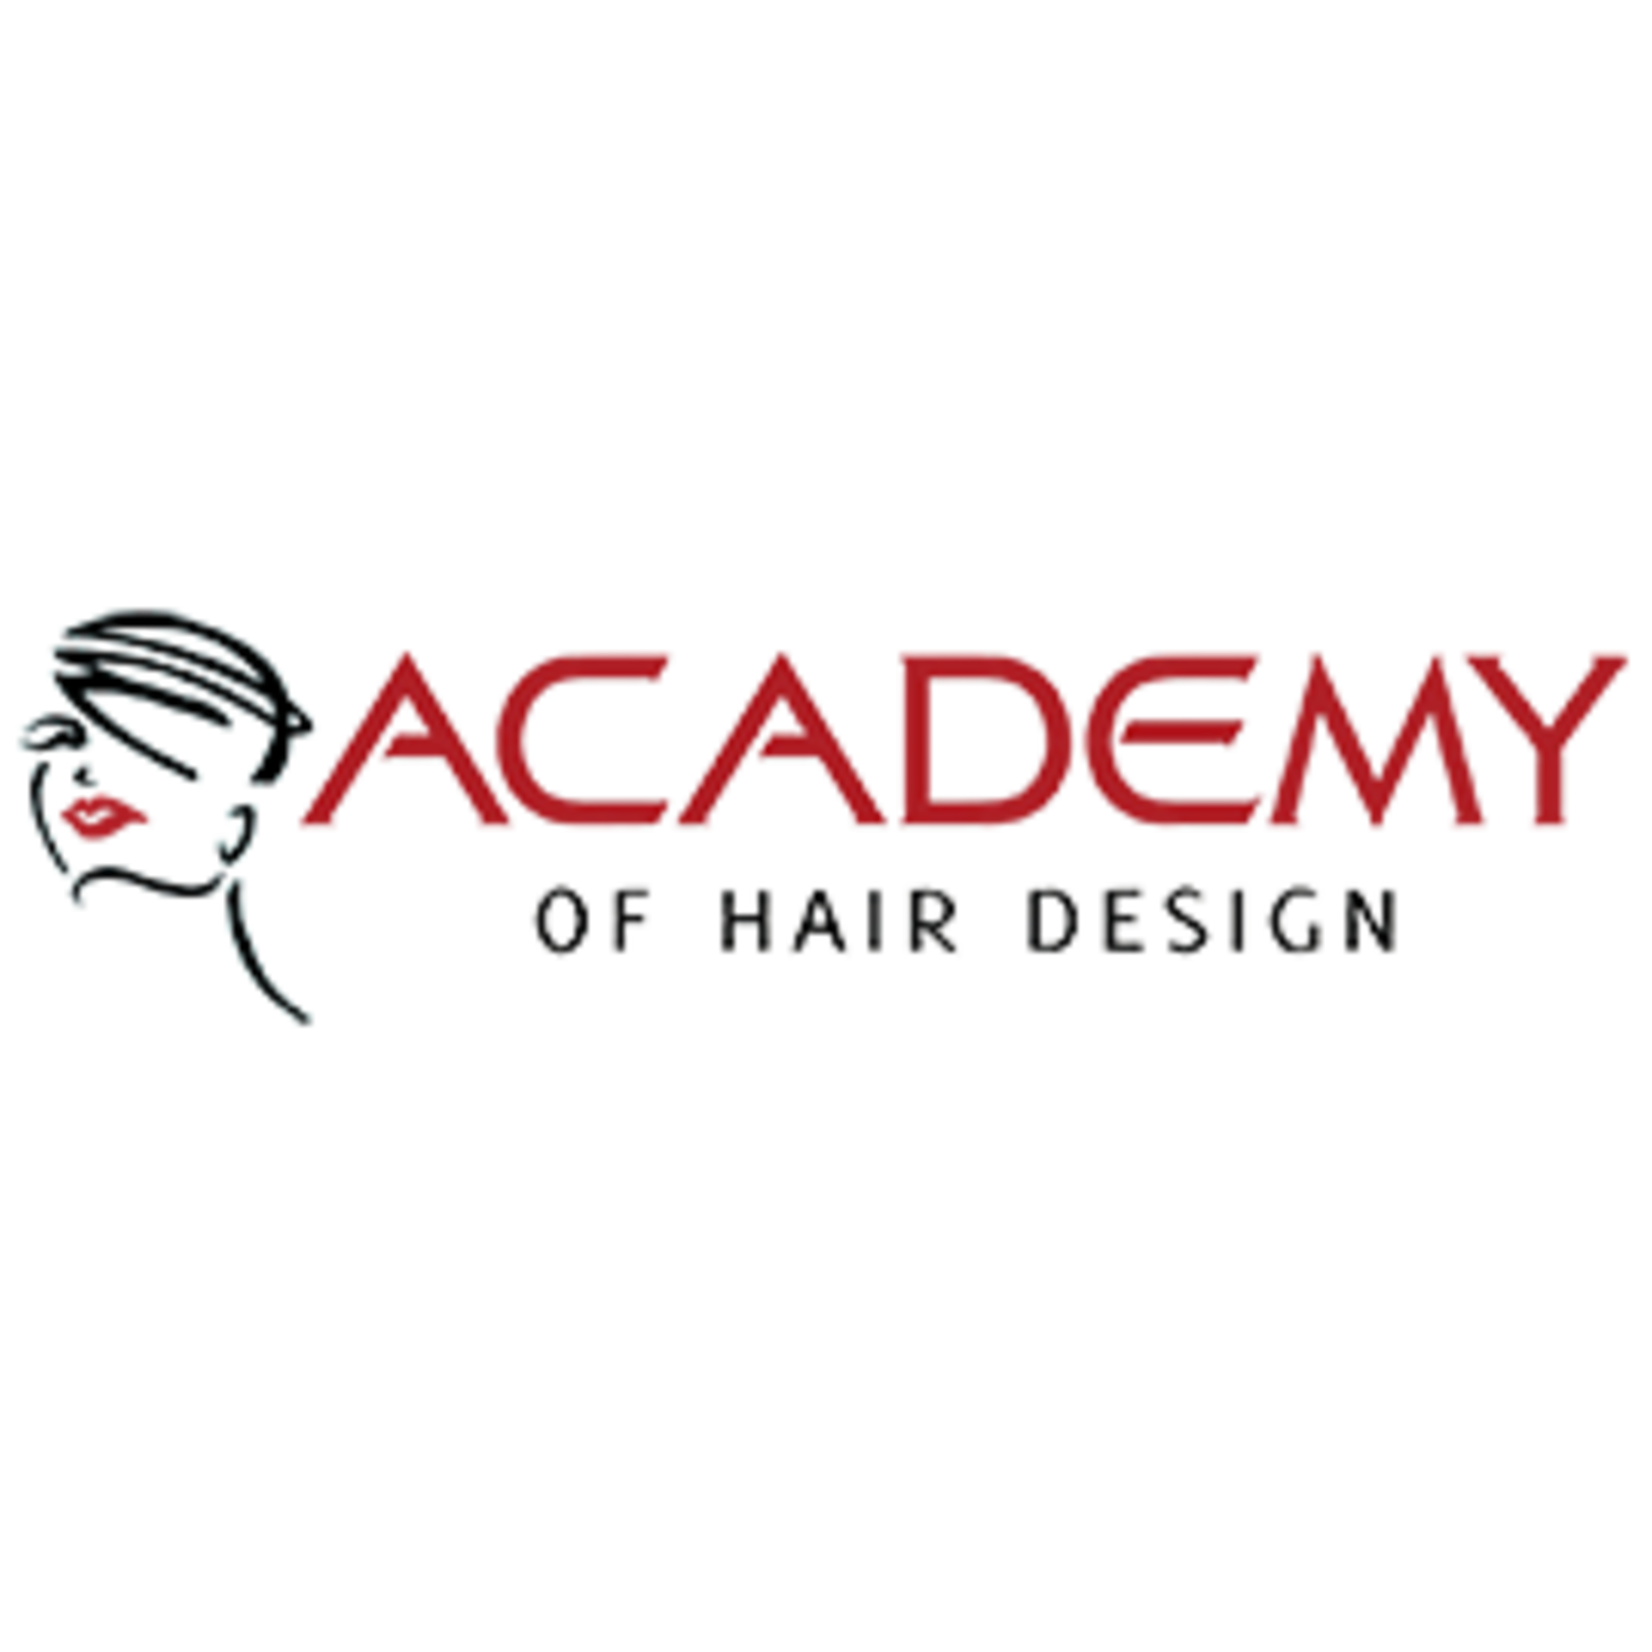 Academy of Hair Design Academy of Hair Design $10 - Shampoo , Cut and Style